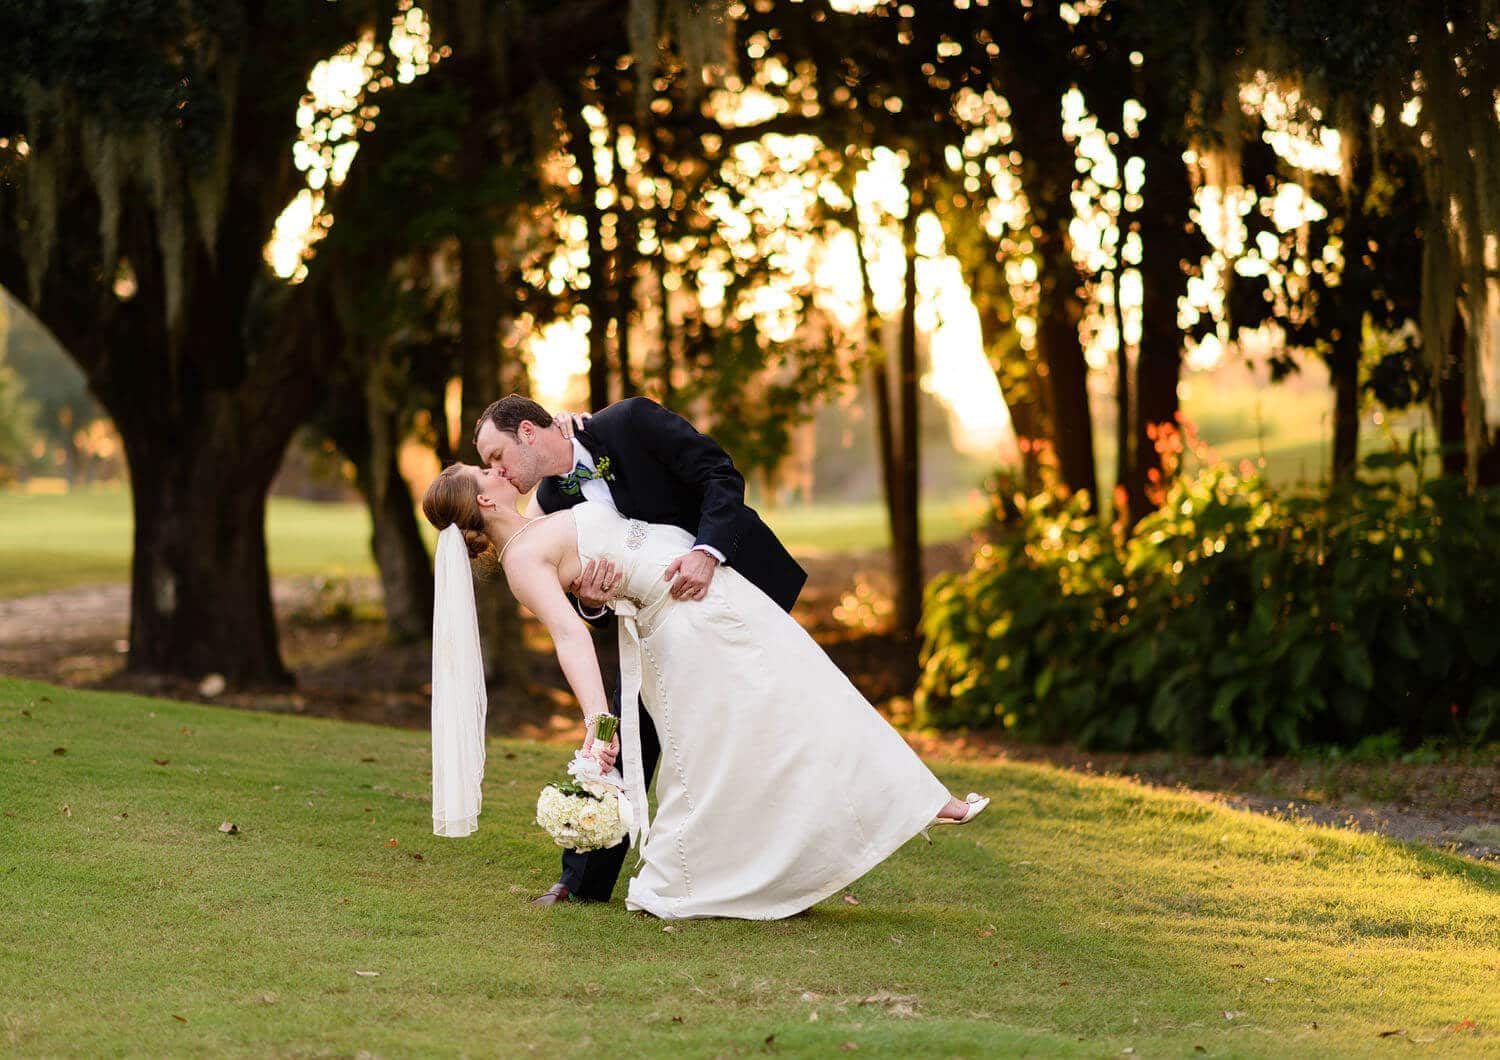 Dipping the bride back in front of the sunset